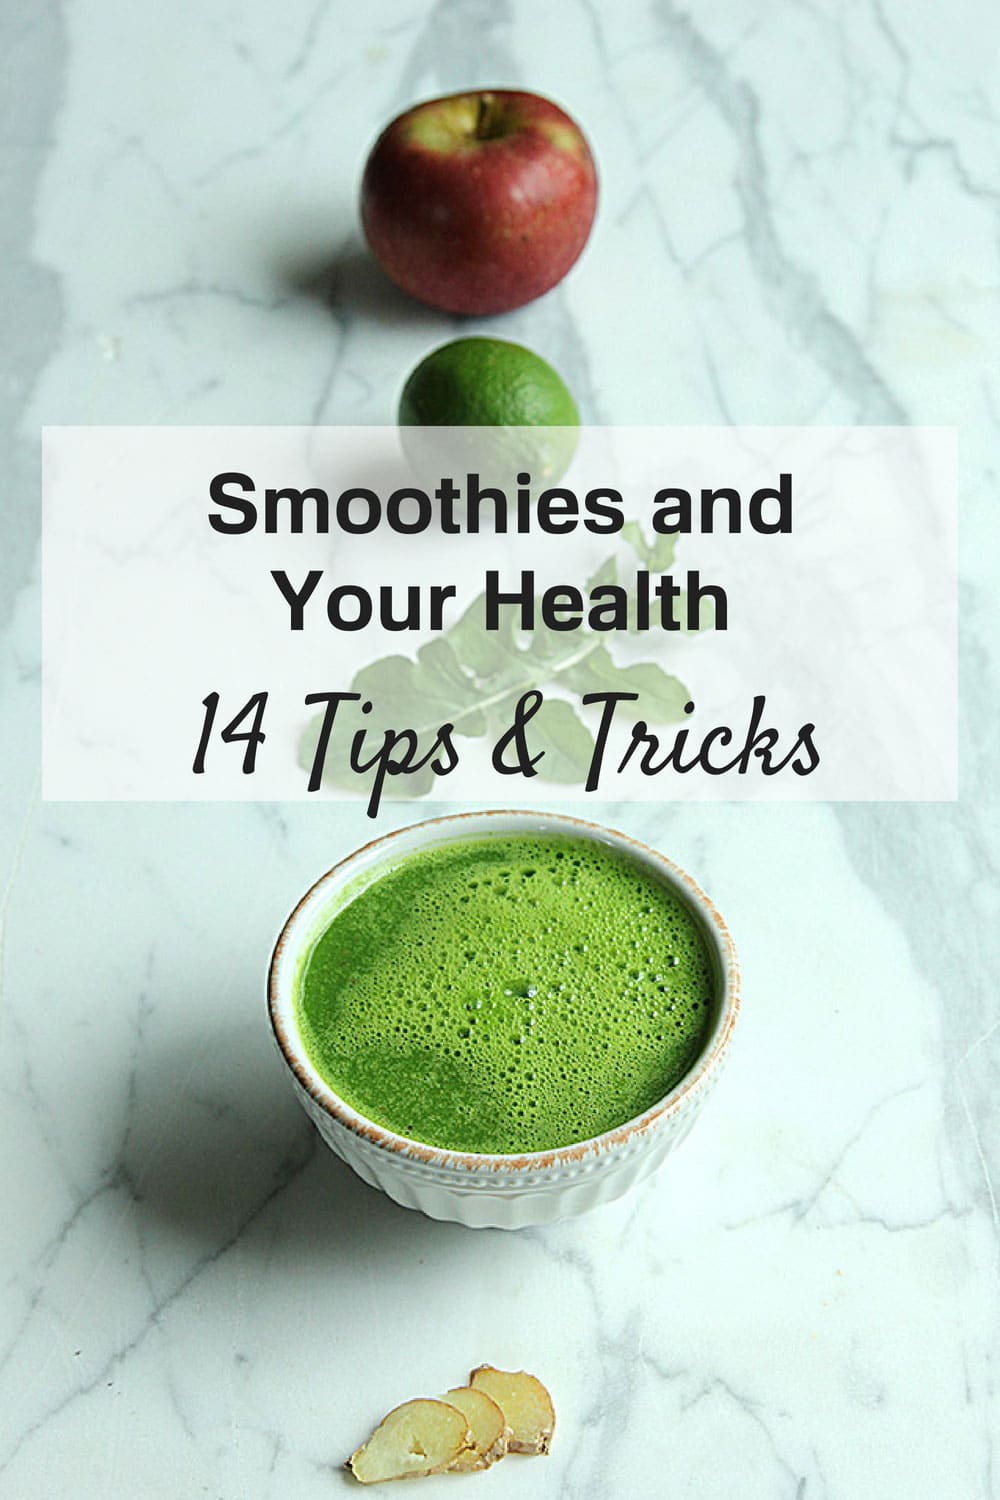 14 Tips And Tricks For Healthier Smoothies